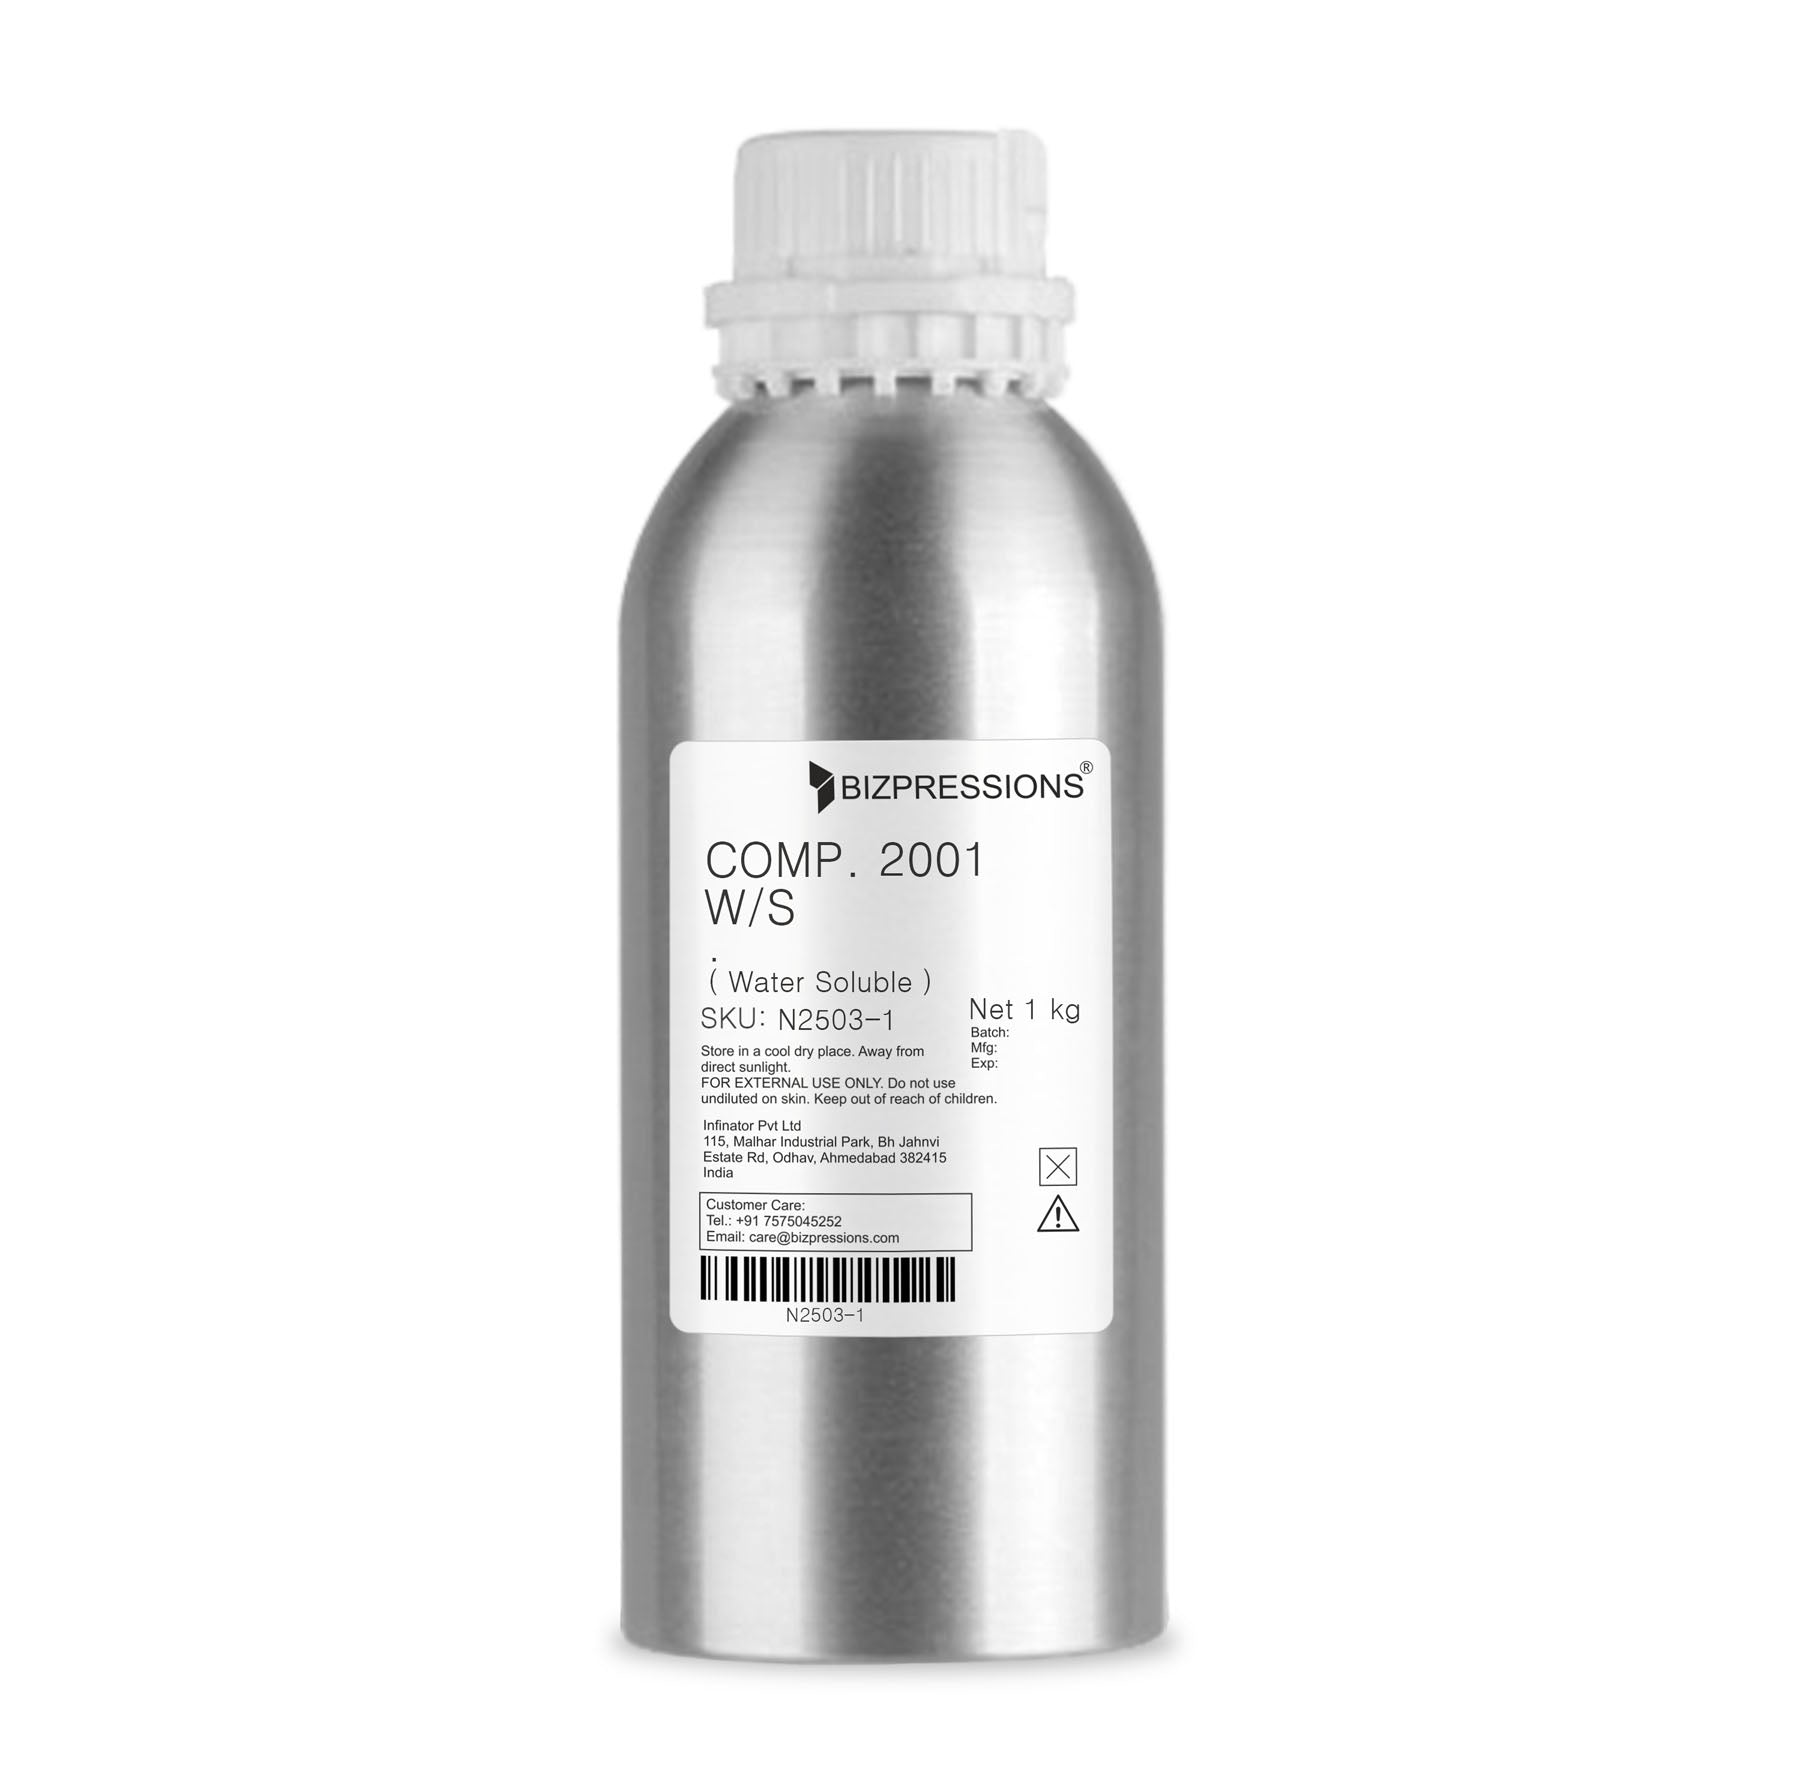 COMP 2001 W/S - Fragrance ( Water Soluble ) - 1 kg